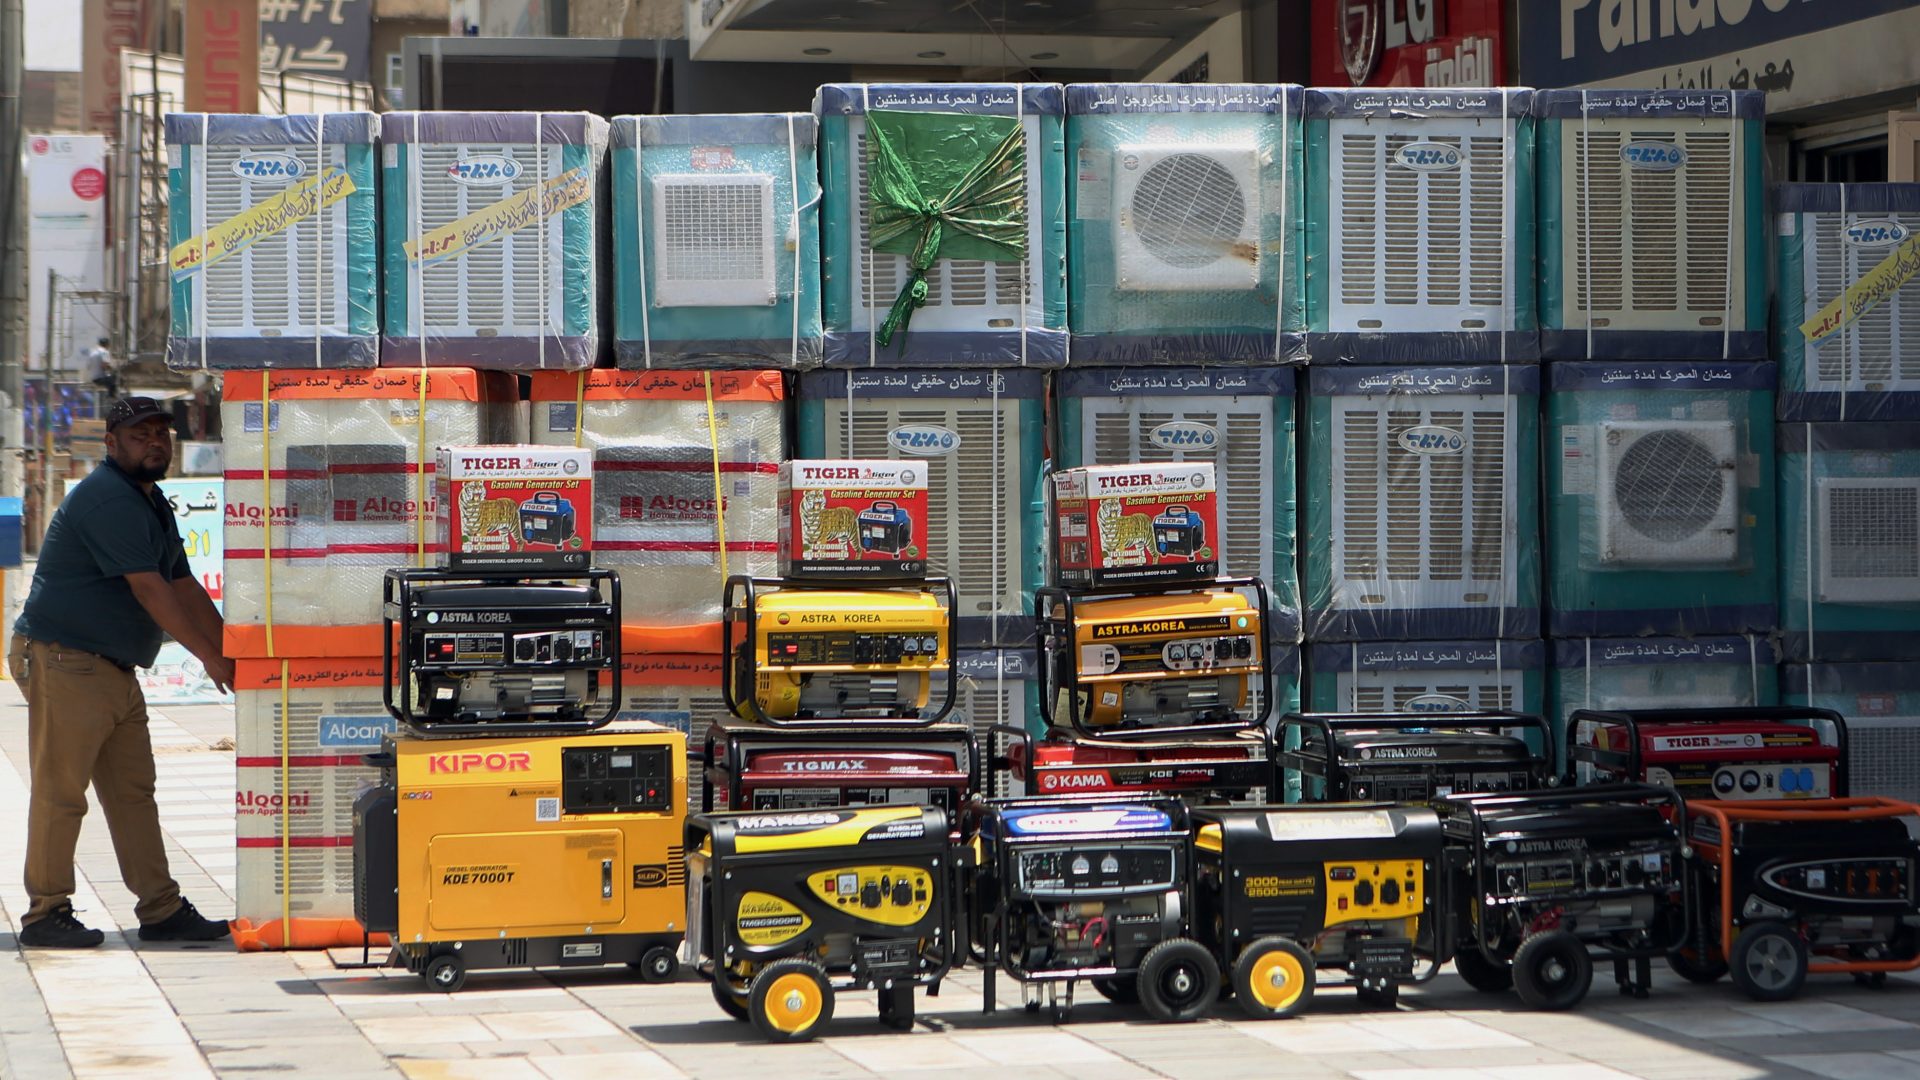 FILE PHOTO: In this Thursday, July 30, 2015 file photo, air conditioners and power generators are displayed on a street in central Baghdad, Iraq. Nations reached a deal Saturday, Oct. 15, 2016 to limit the use of hydrofluorocarbons, or HFCs - greenhouse gases far more powerful than carbon dioxide that are used in air conditioners and refrigerators, in a major effort to fight climate change.